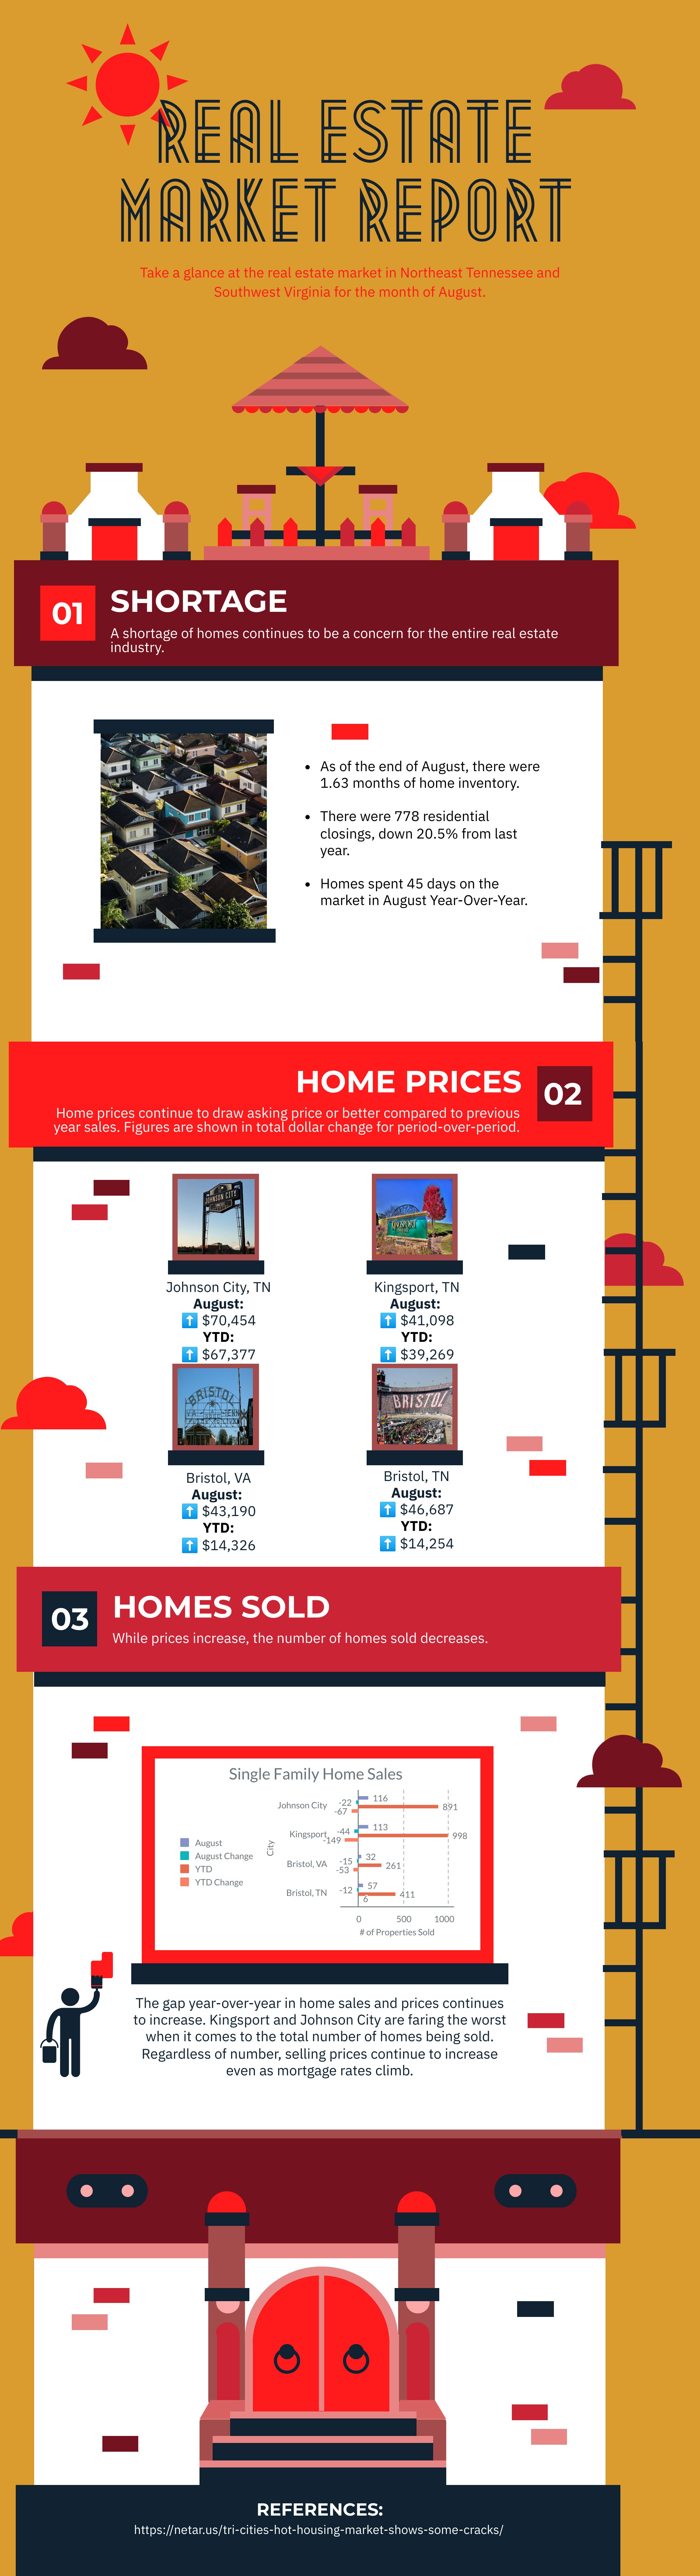 infographic, real estate market, graphic